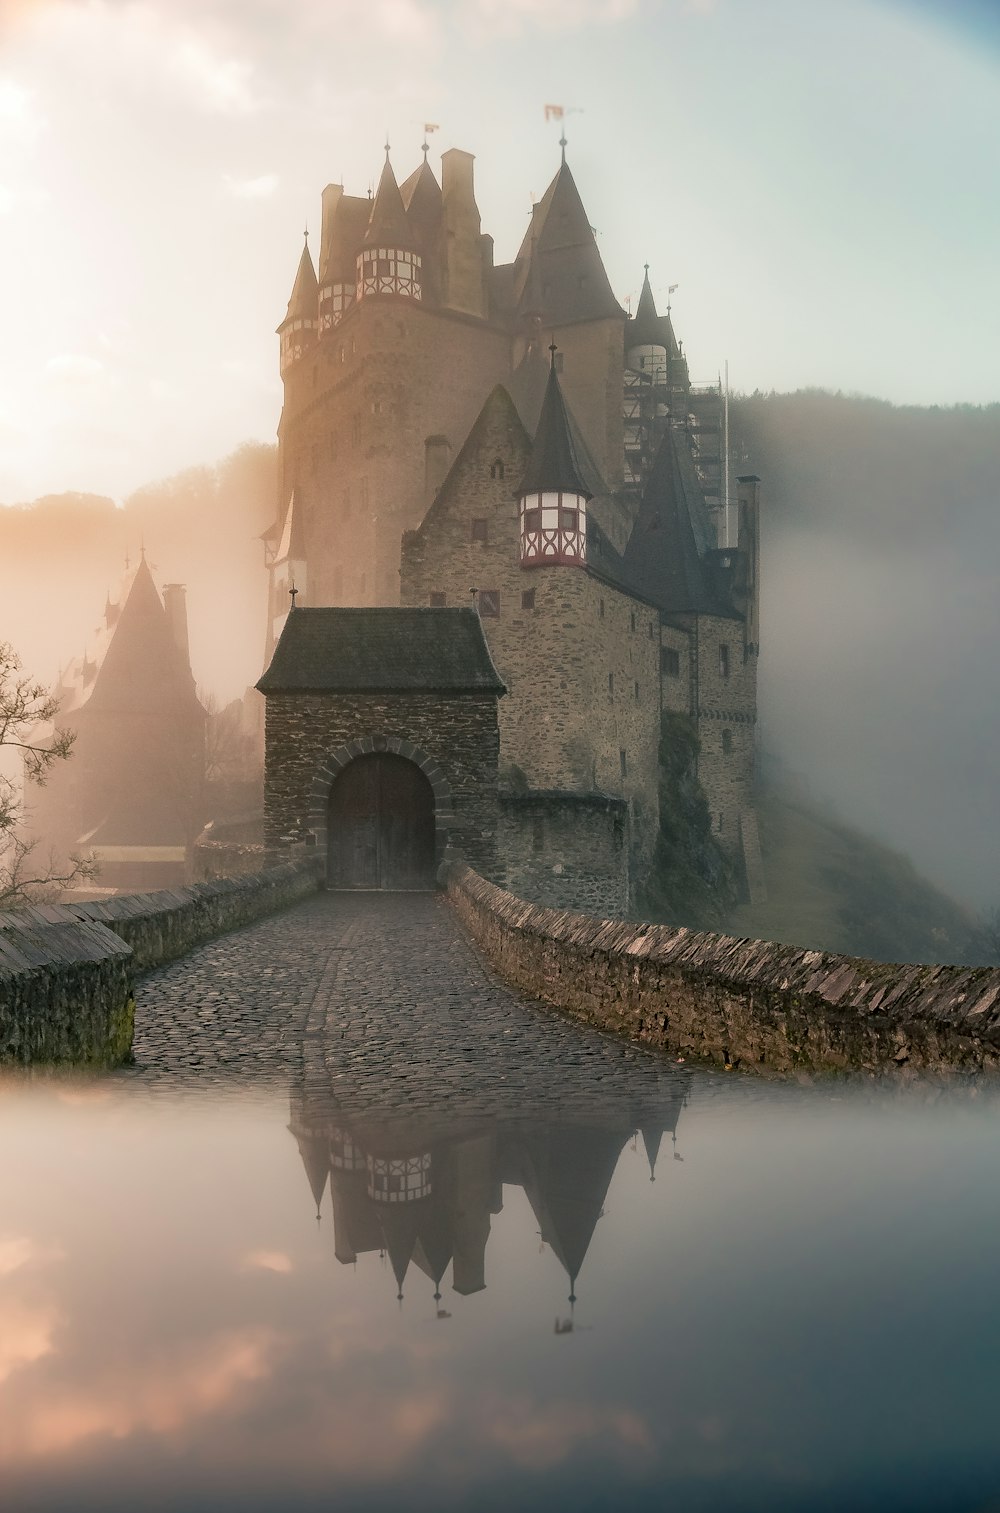 A castle with a bird flying over it photo – Free France Image on Unsplash